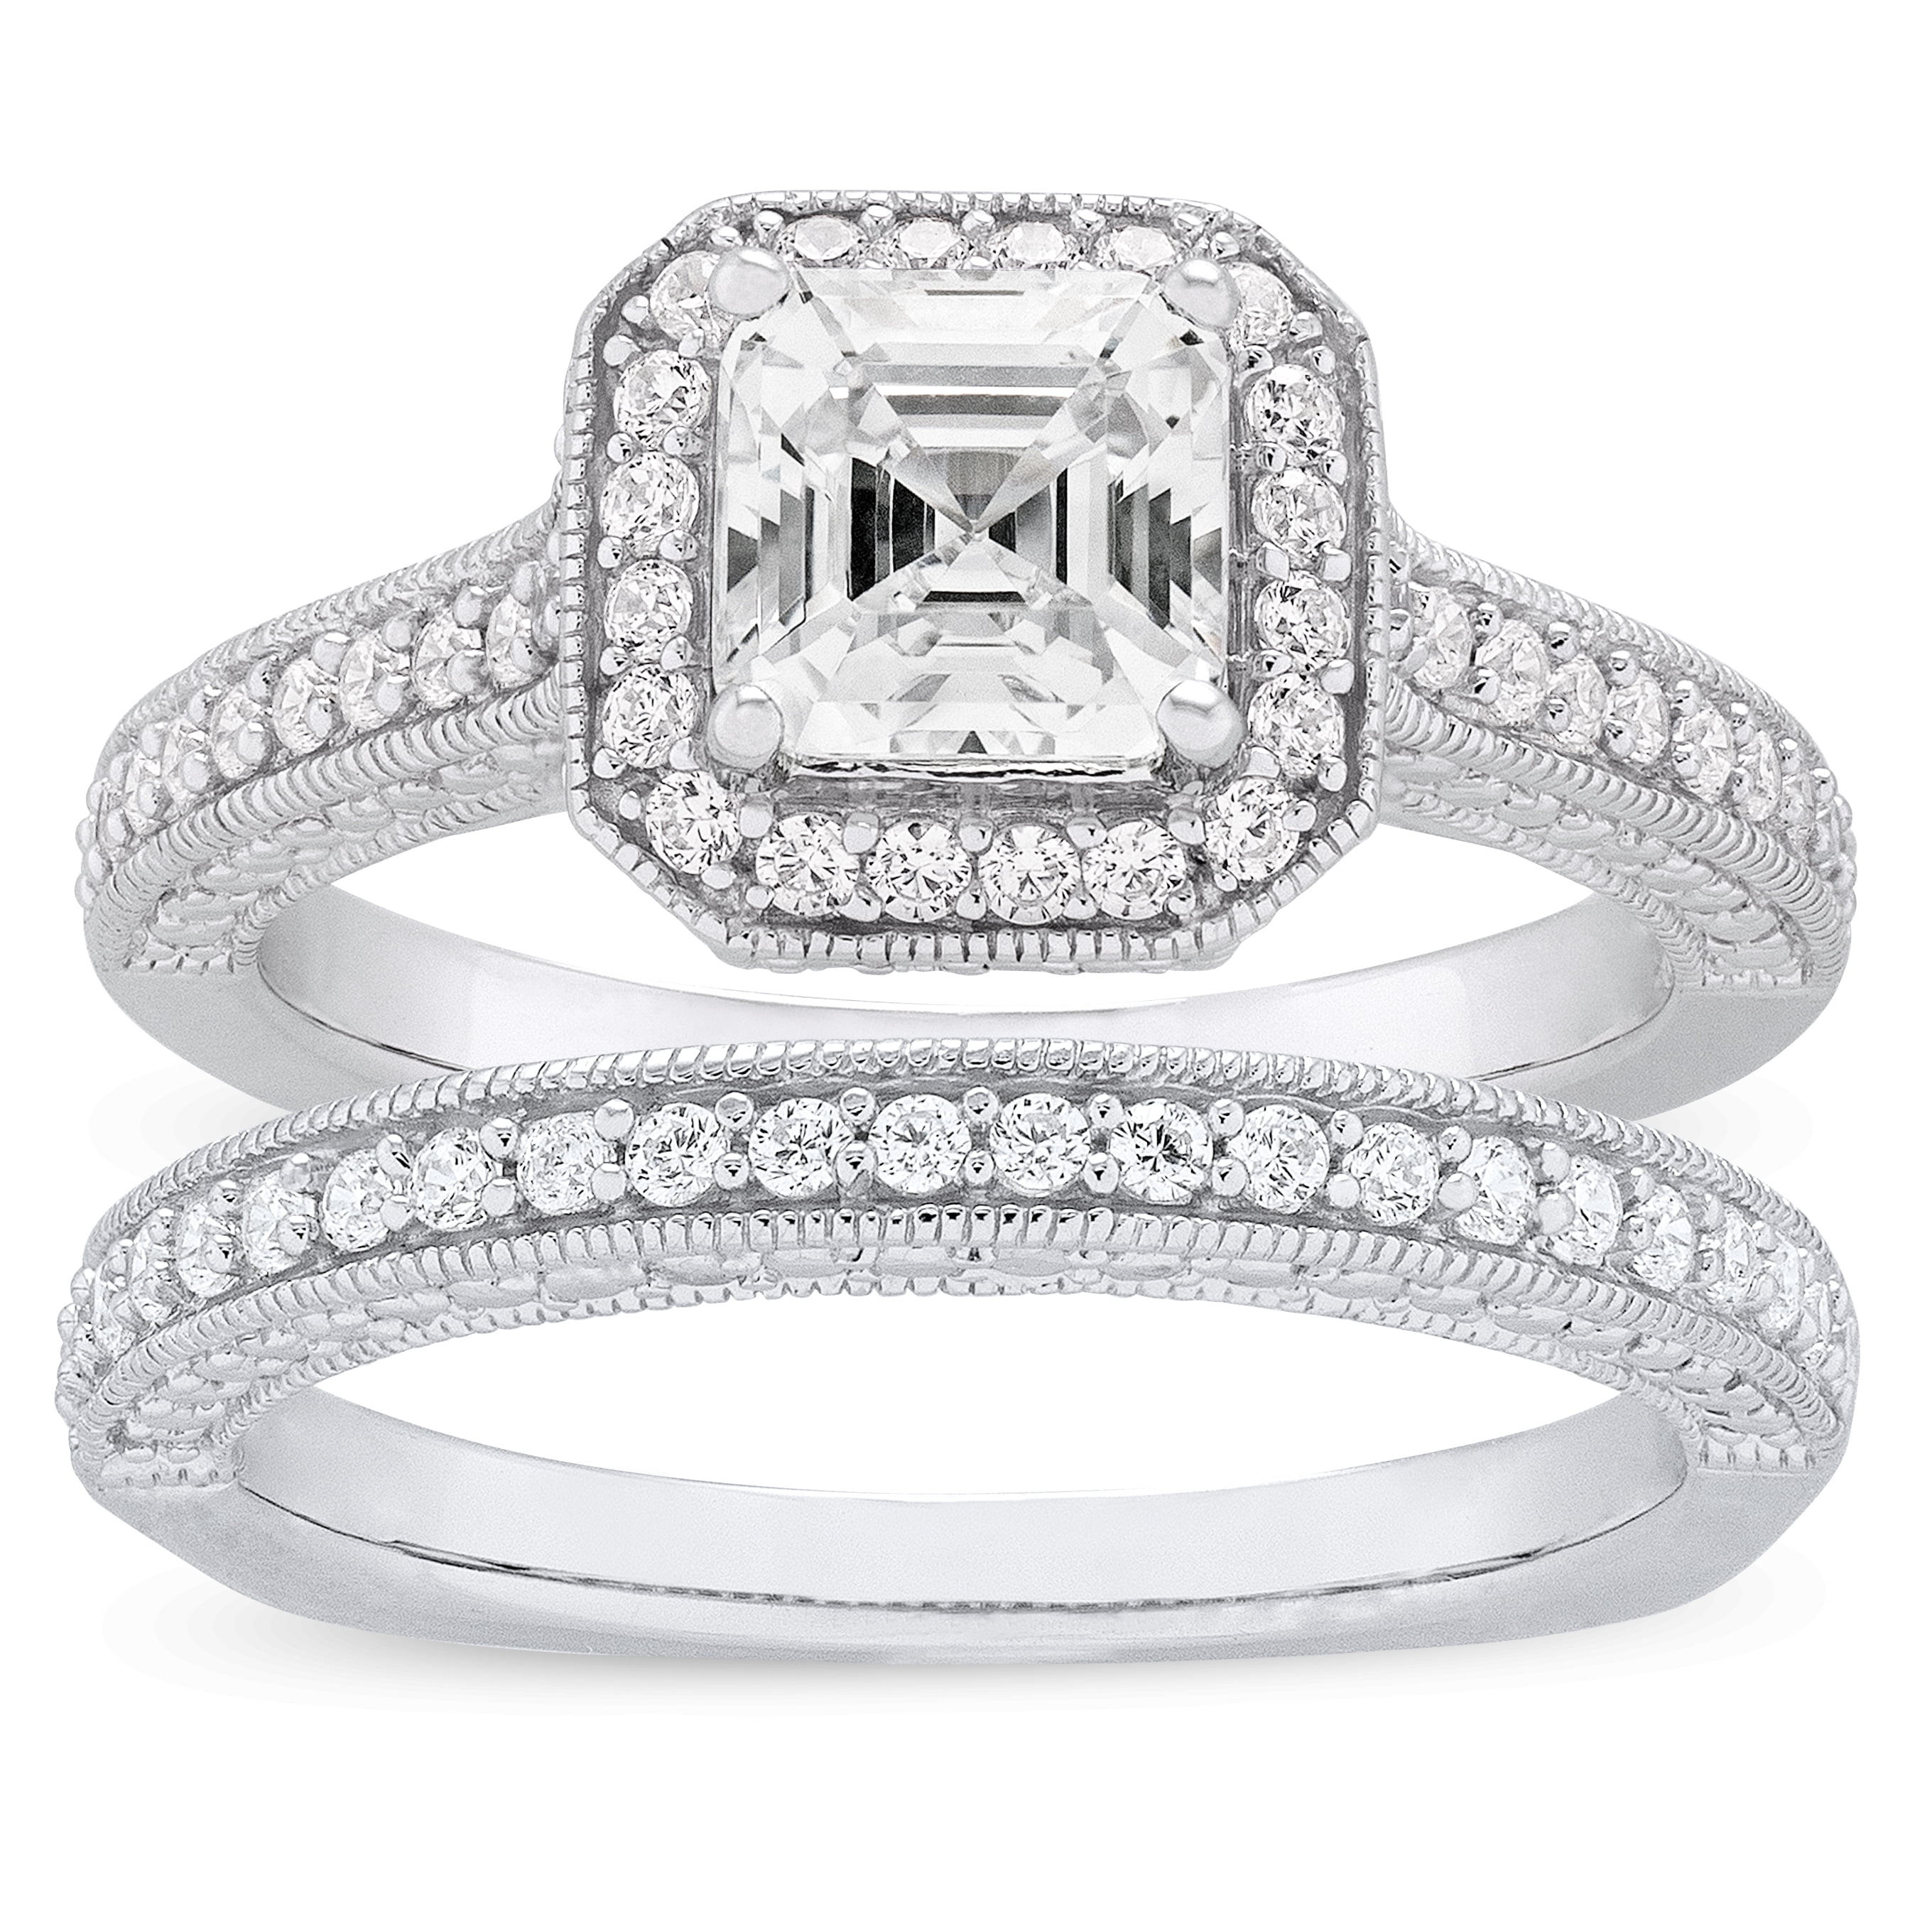 Details about   Stunning Diamond Ring set in Sterling Silver 